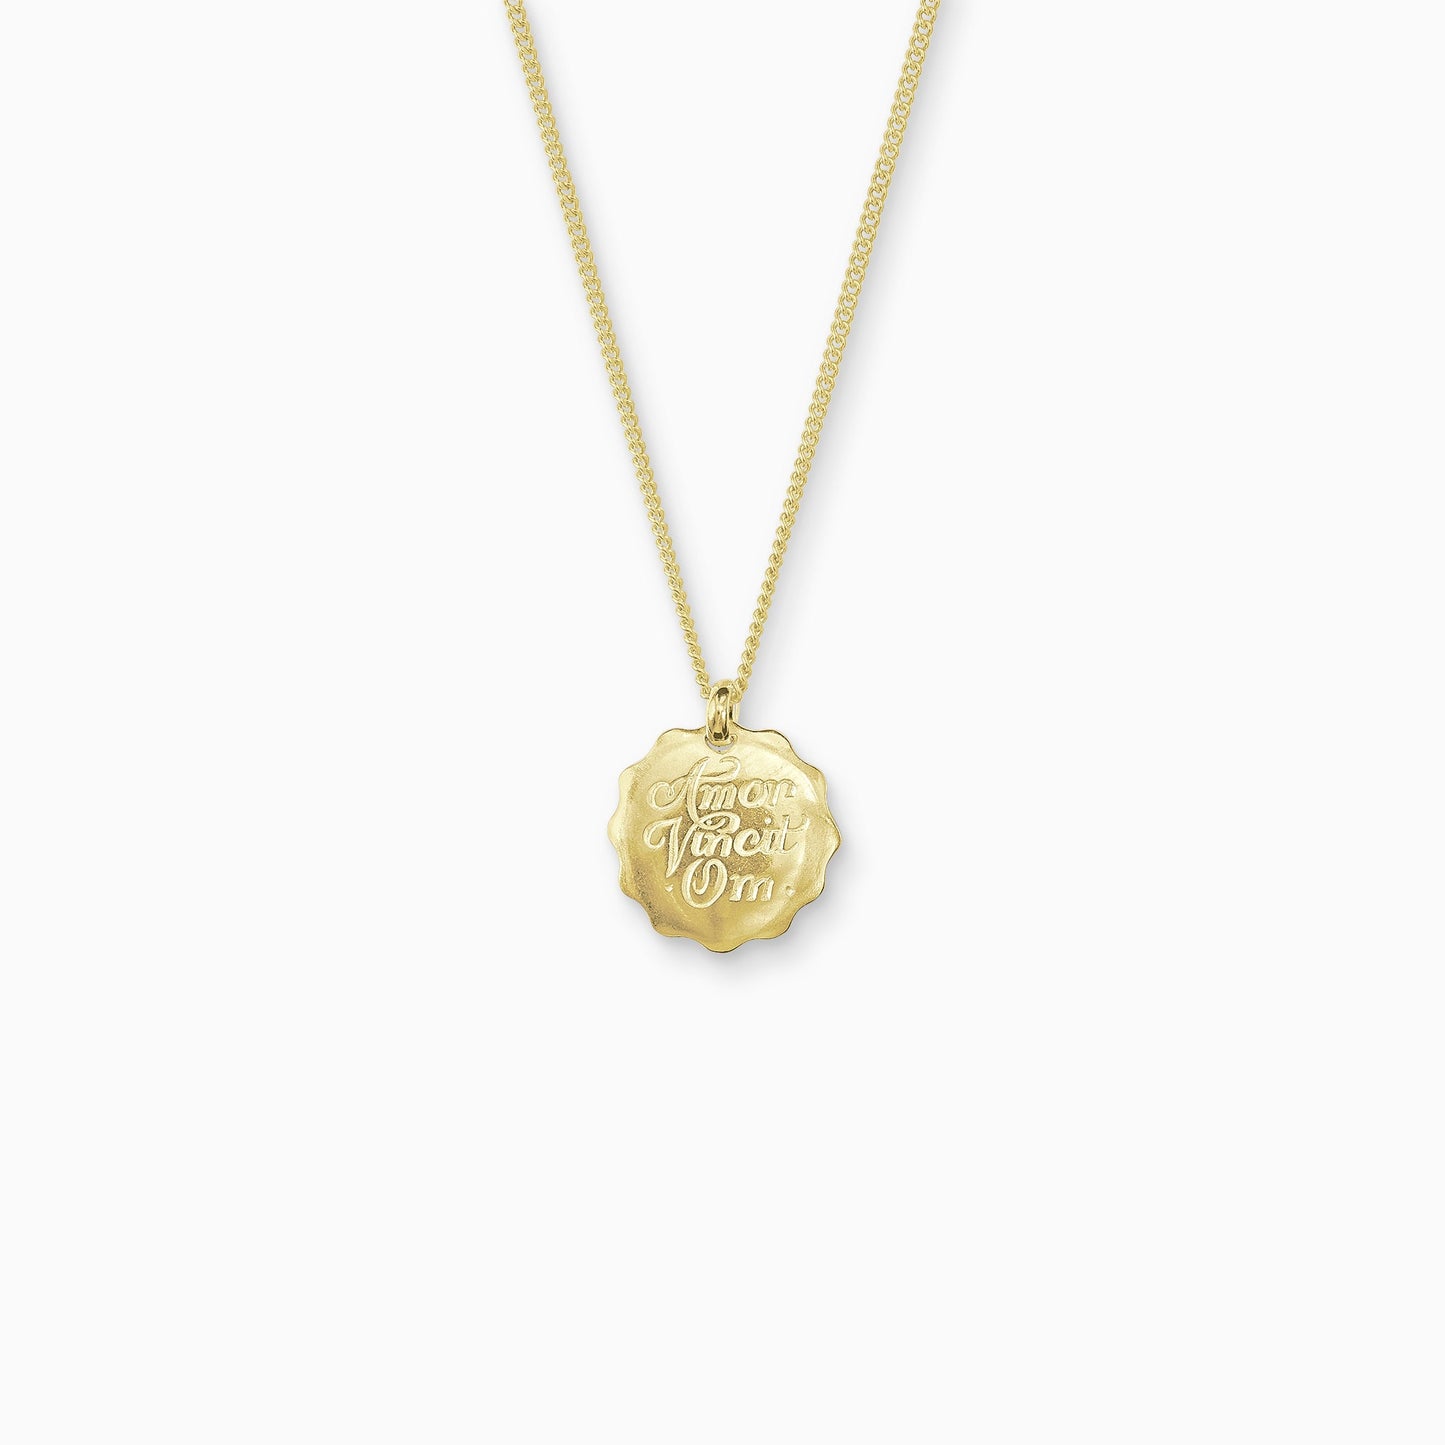 18ct Fairtrade yellow gold round 22mm diameter charm on a 45cm fine curb chain. The pendant is smooth with a wavy outside edge. Amor Vincit Om, the Medieval Latin for Love Conquers All  is inscribed on the front in a Copperplate script. 